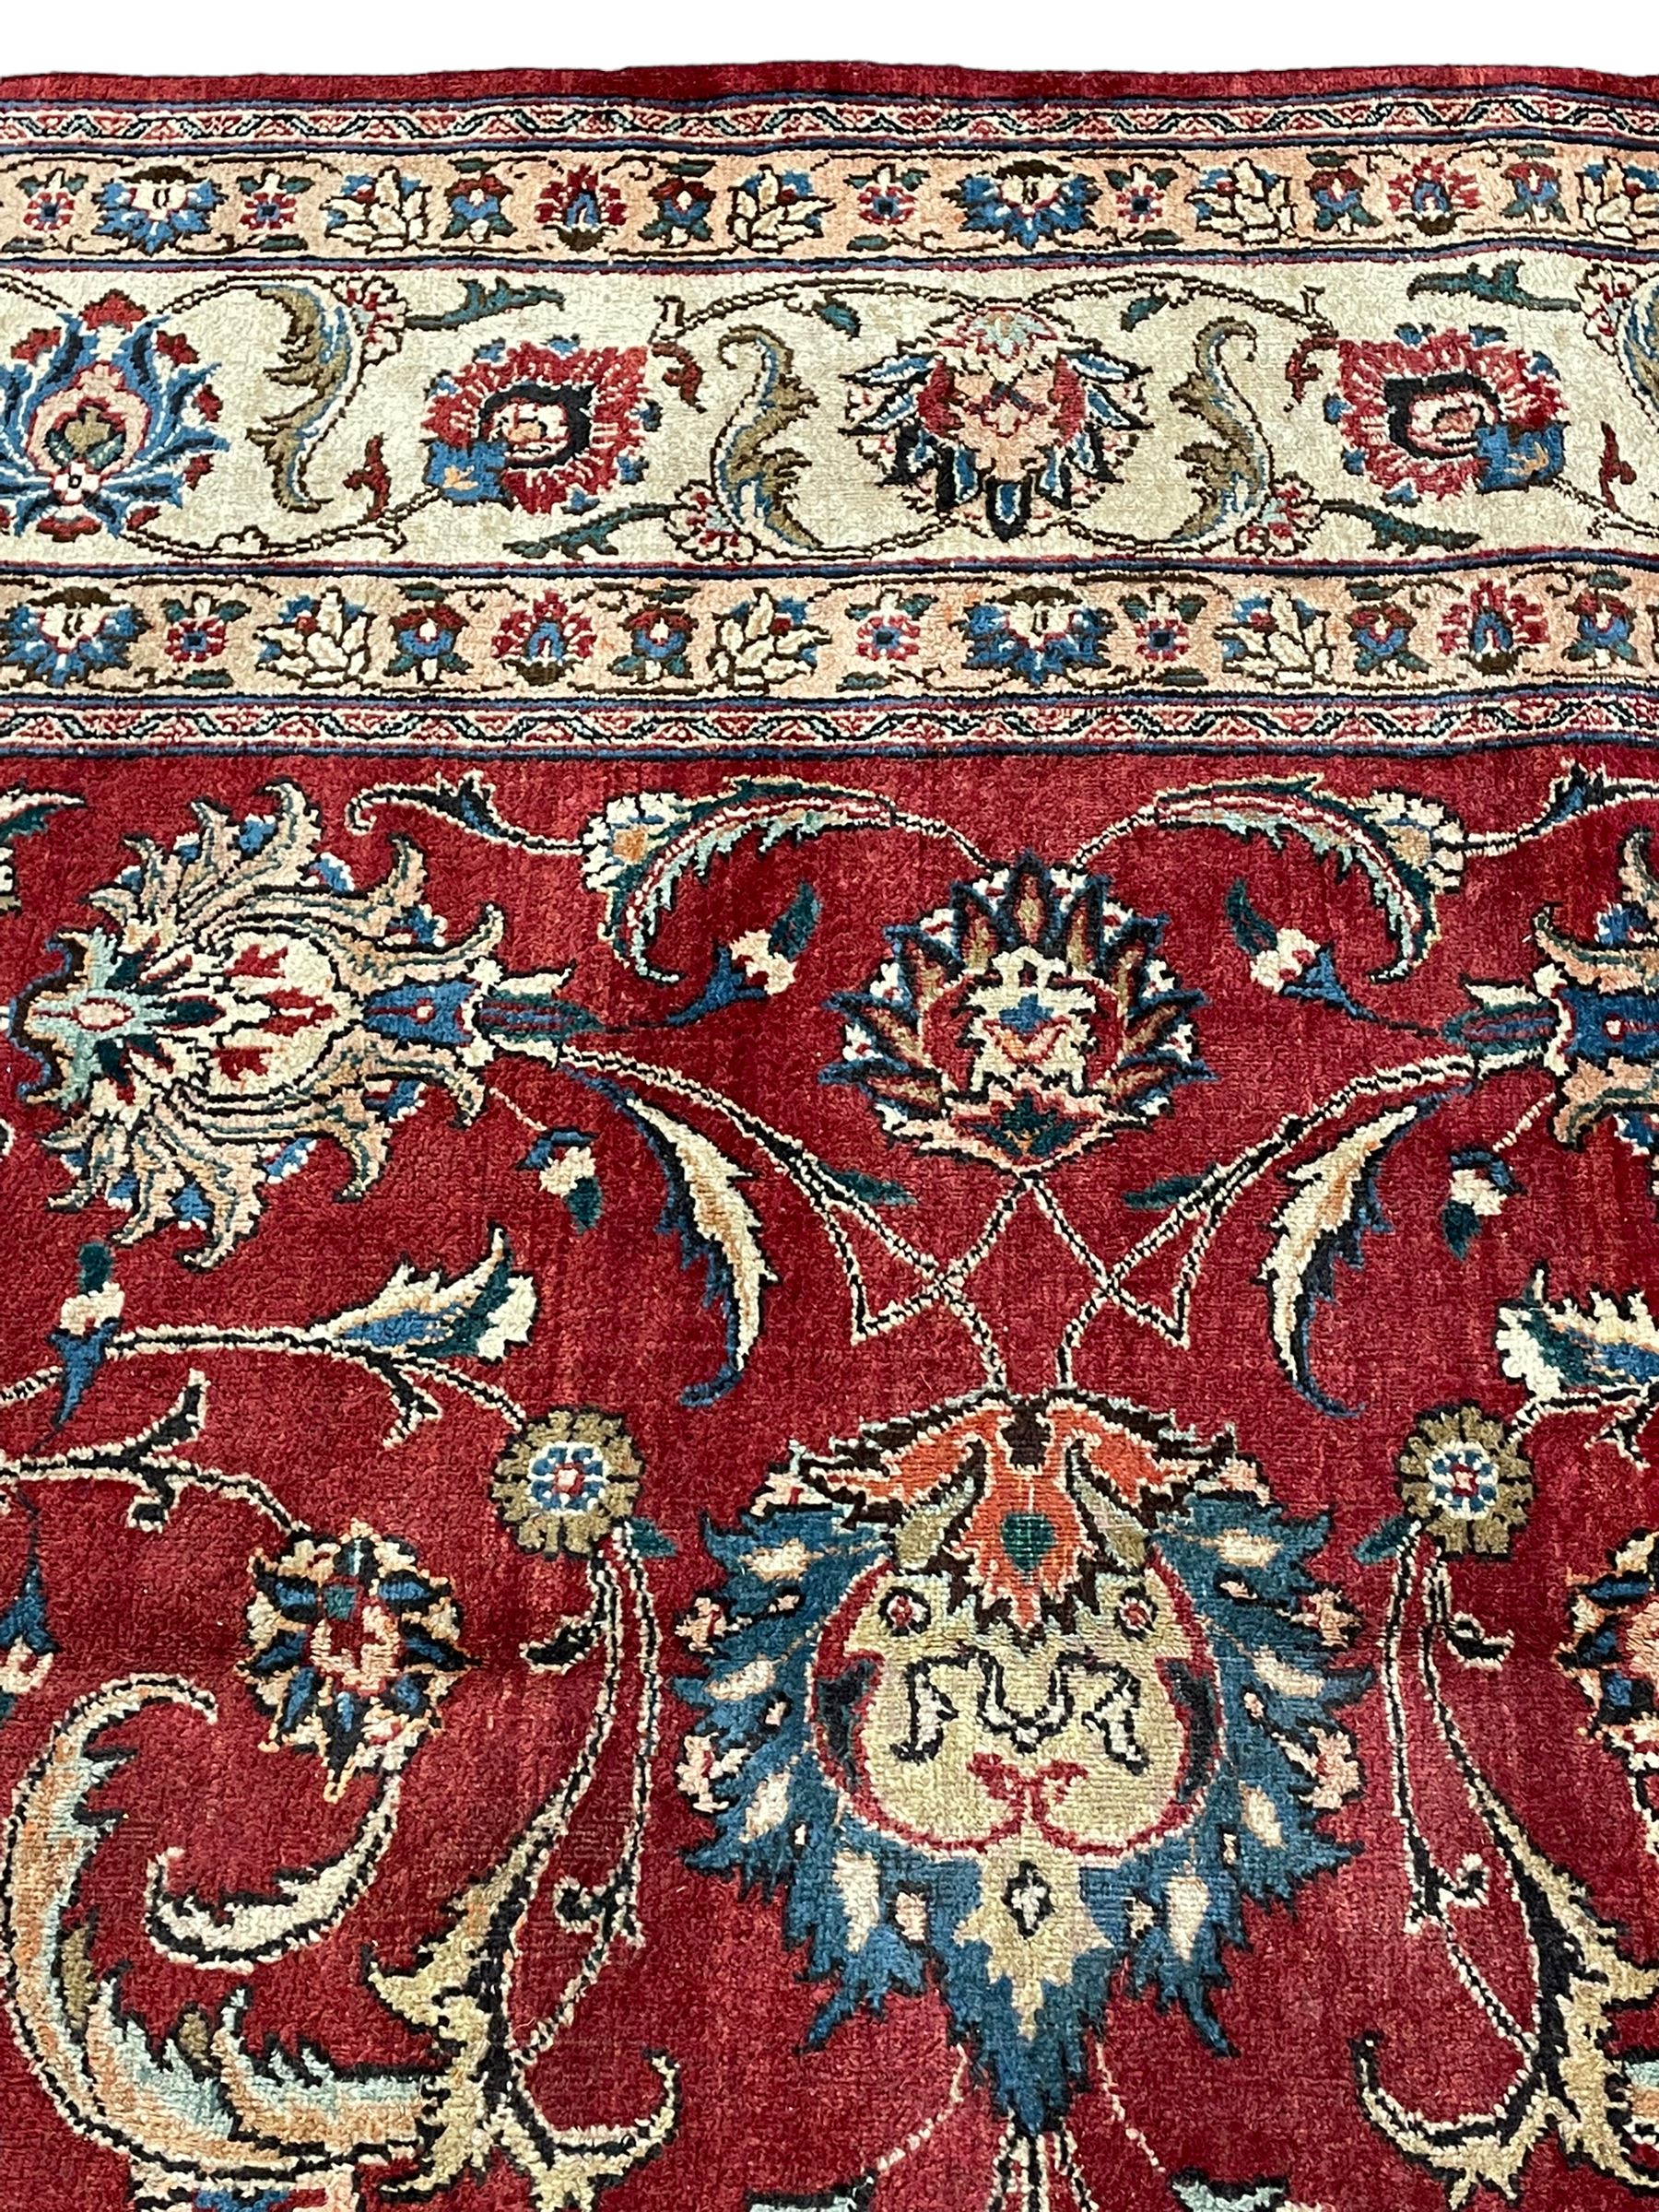 North East Persian signed meshed carpet - Image 4 of 8